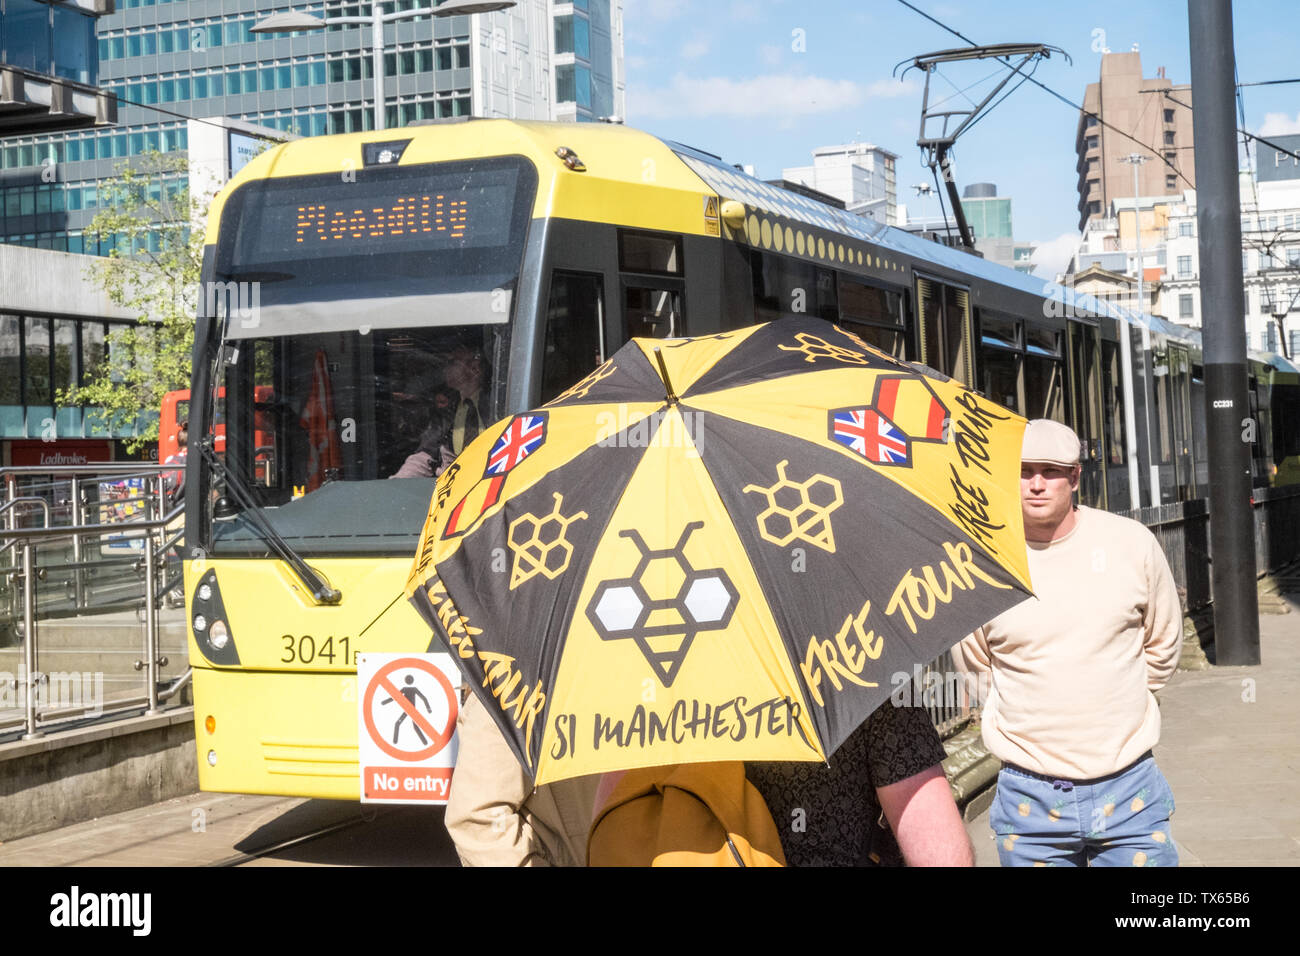 Free,donation,only,guided,tour,bee,symbol,umbrella,Metrolink,Manchester,north,northern,north west,city,England,English,GB,UK,Britain,British,Europe, Stock Photo